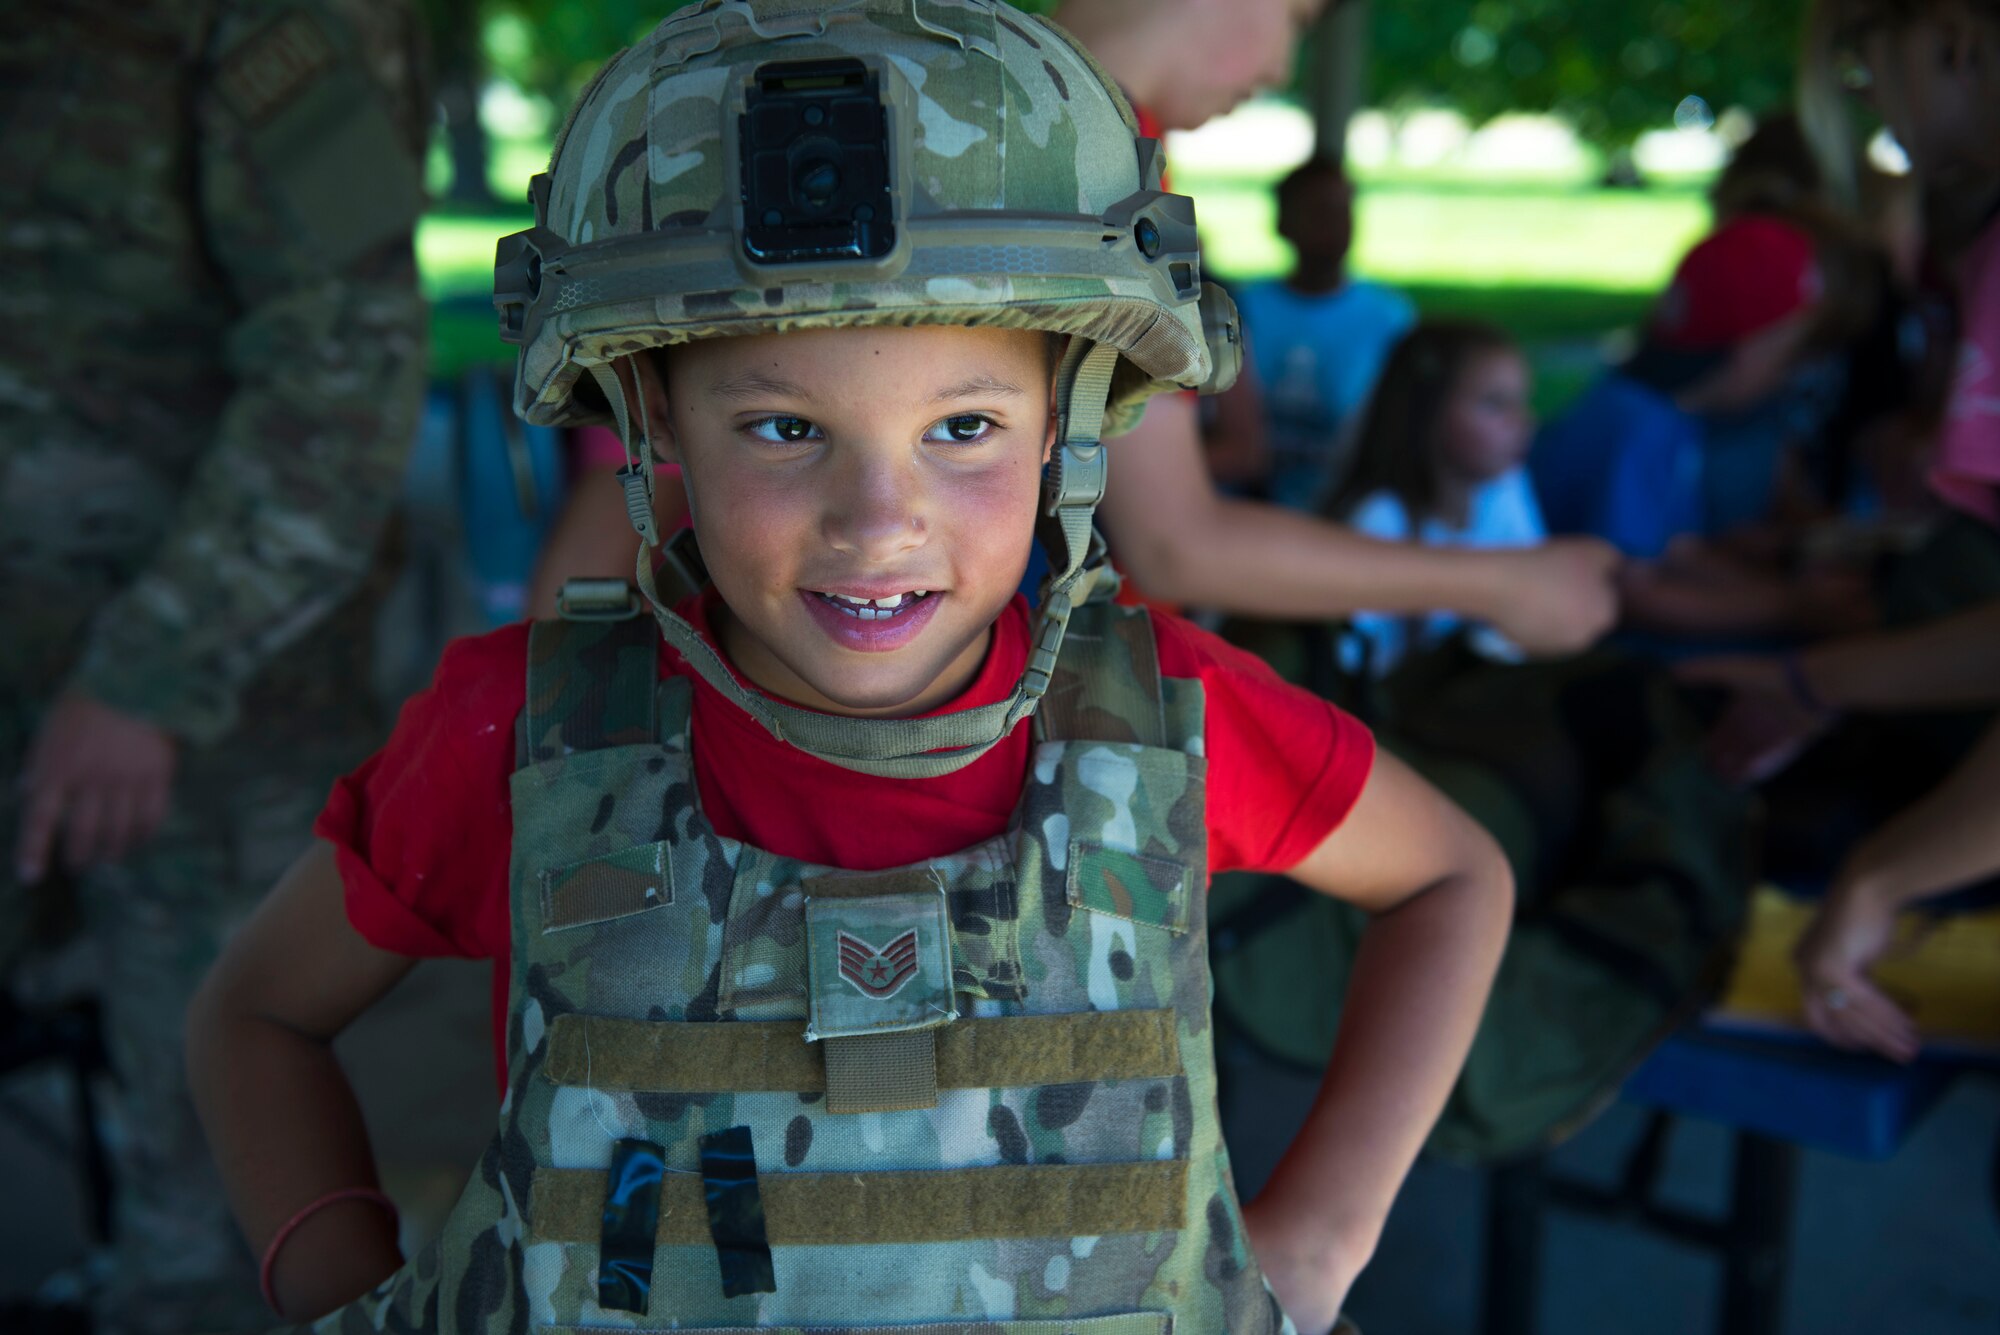 A child from Fairchild’s Youth Center tries on protective gear from the 92nd Civil Engineer Squadron Explosive Ordnance Disposal flight during the Summer Youth Fair at Fairchild Air Force, Washington, July 25, 2019. Approximately 100 children from across Fairchild participated in the fair. (U.S. Air Force photo by Airman 1st Class Lawrence Sena)